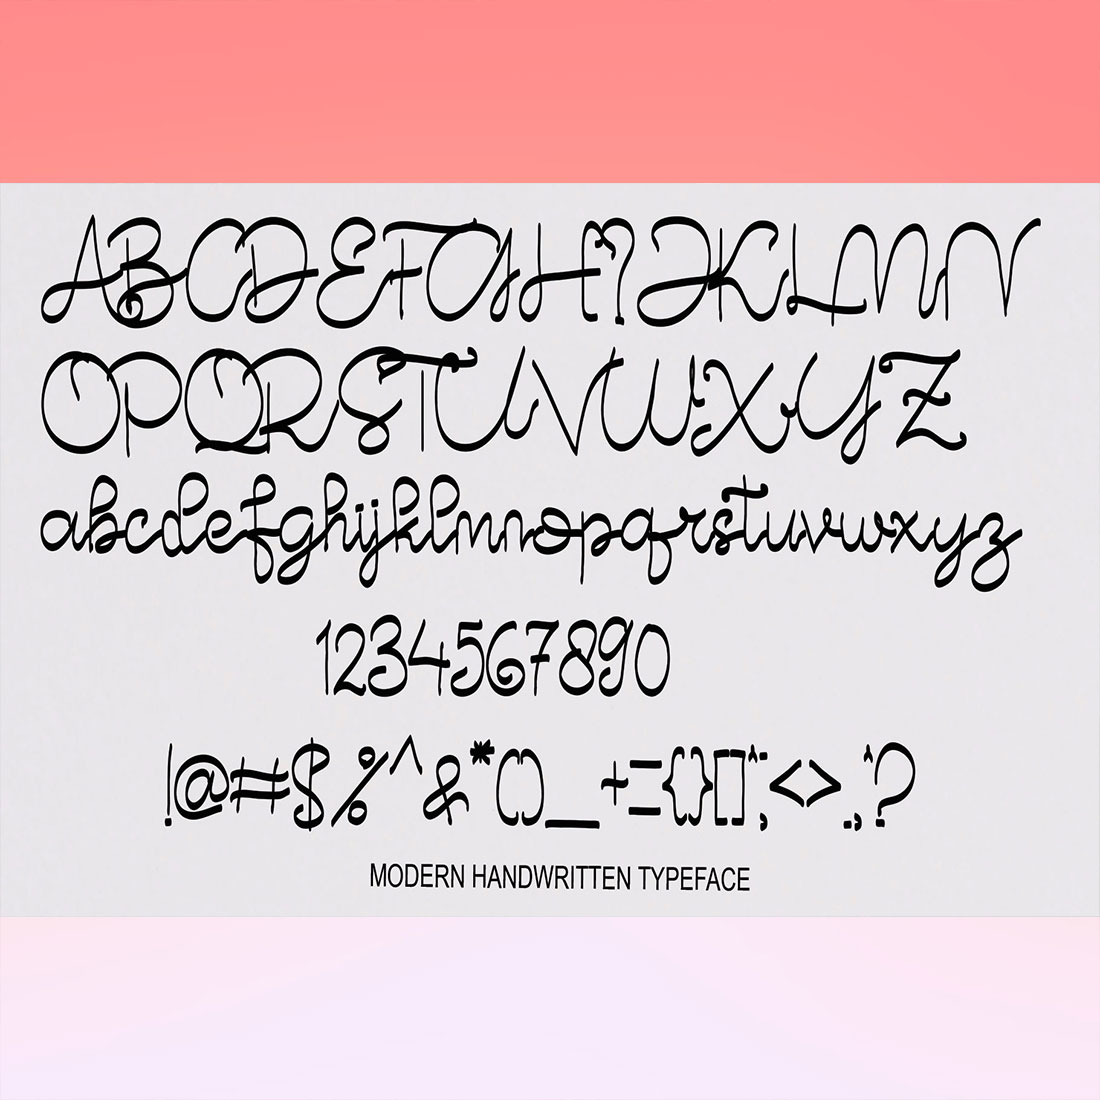 Indegethe Script Font alphabet, punctuation and numbers preview.